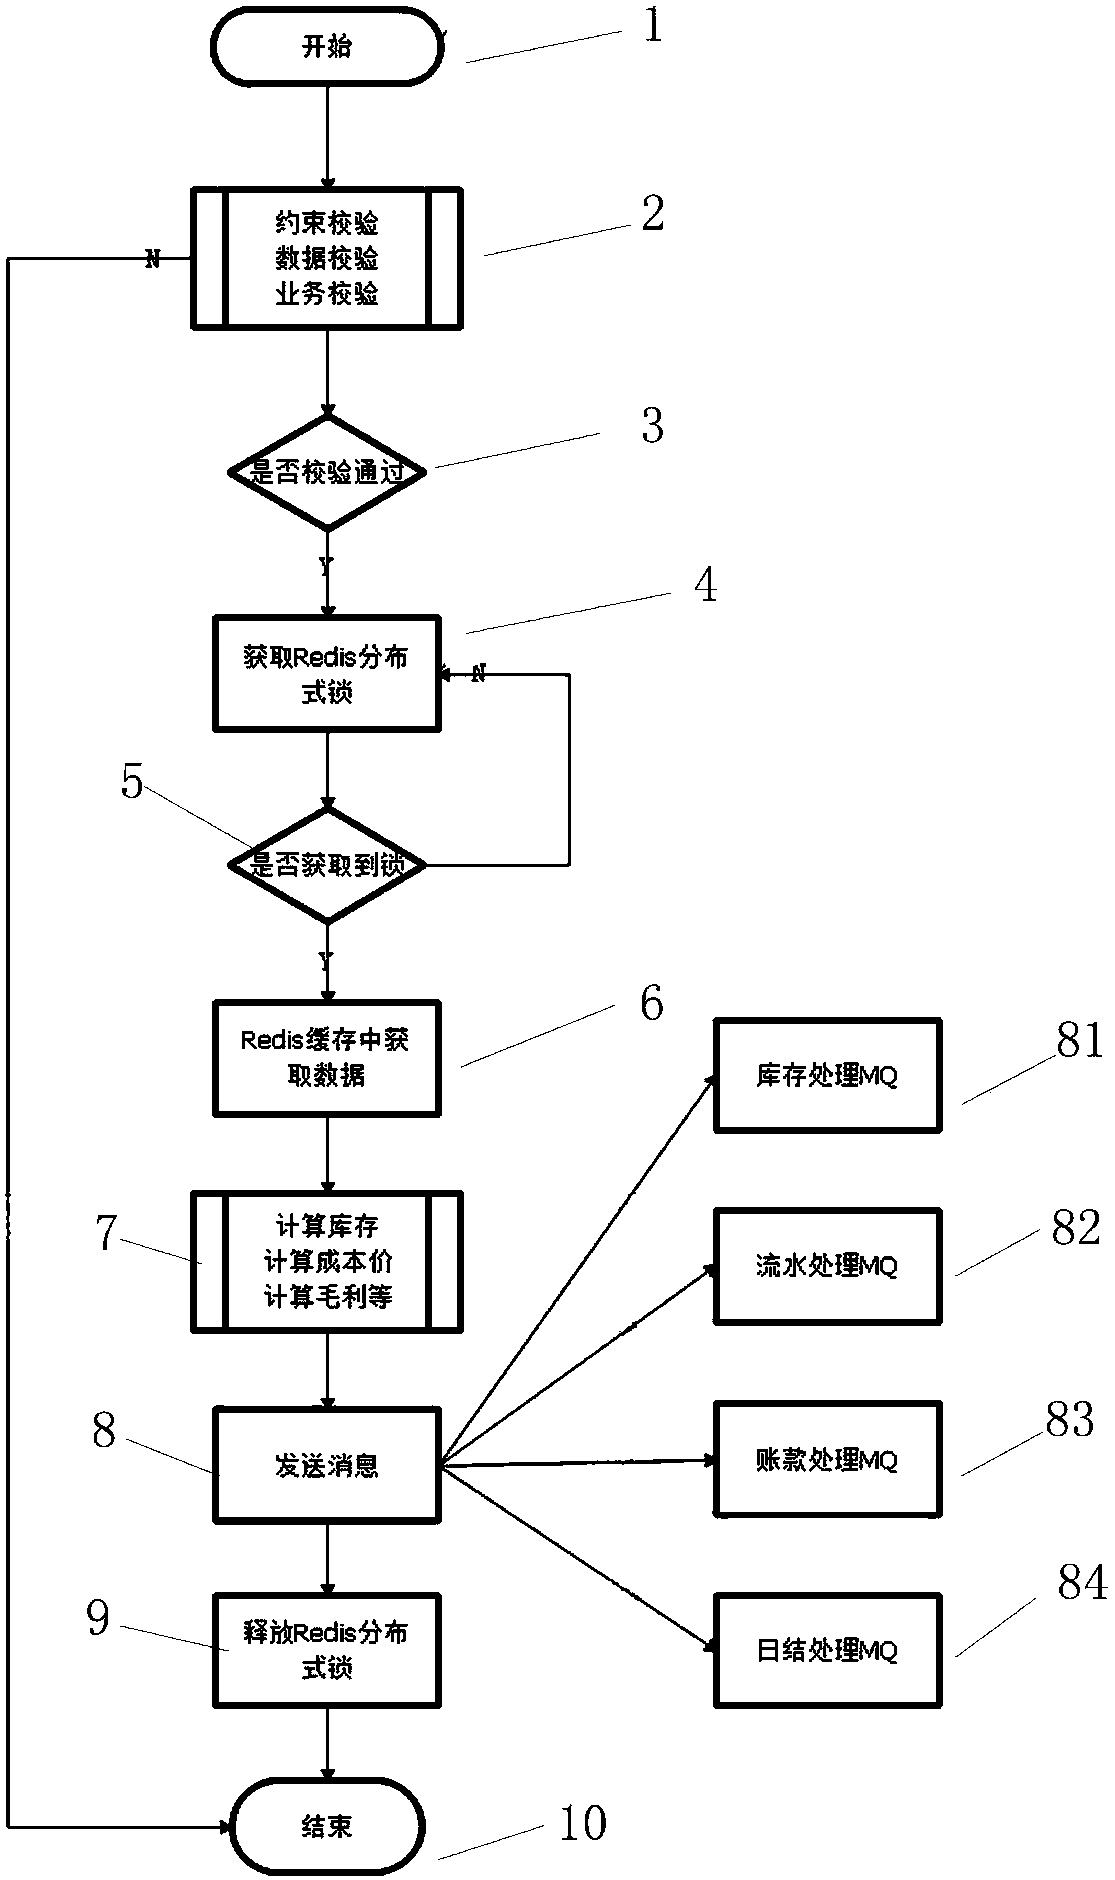 Method for processing inventory data based on dynamic weighting and splitting algorithms